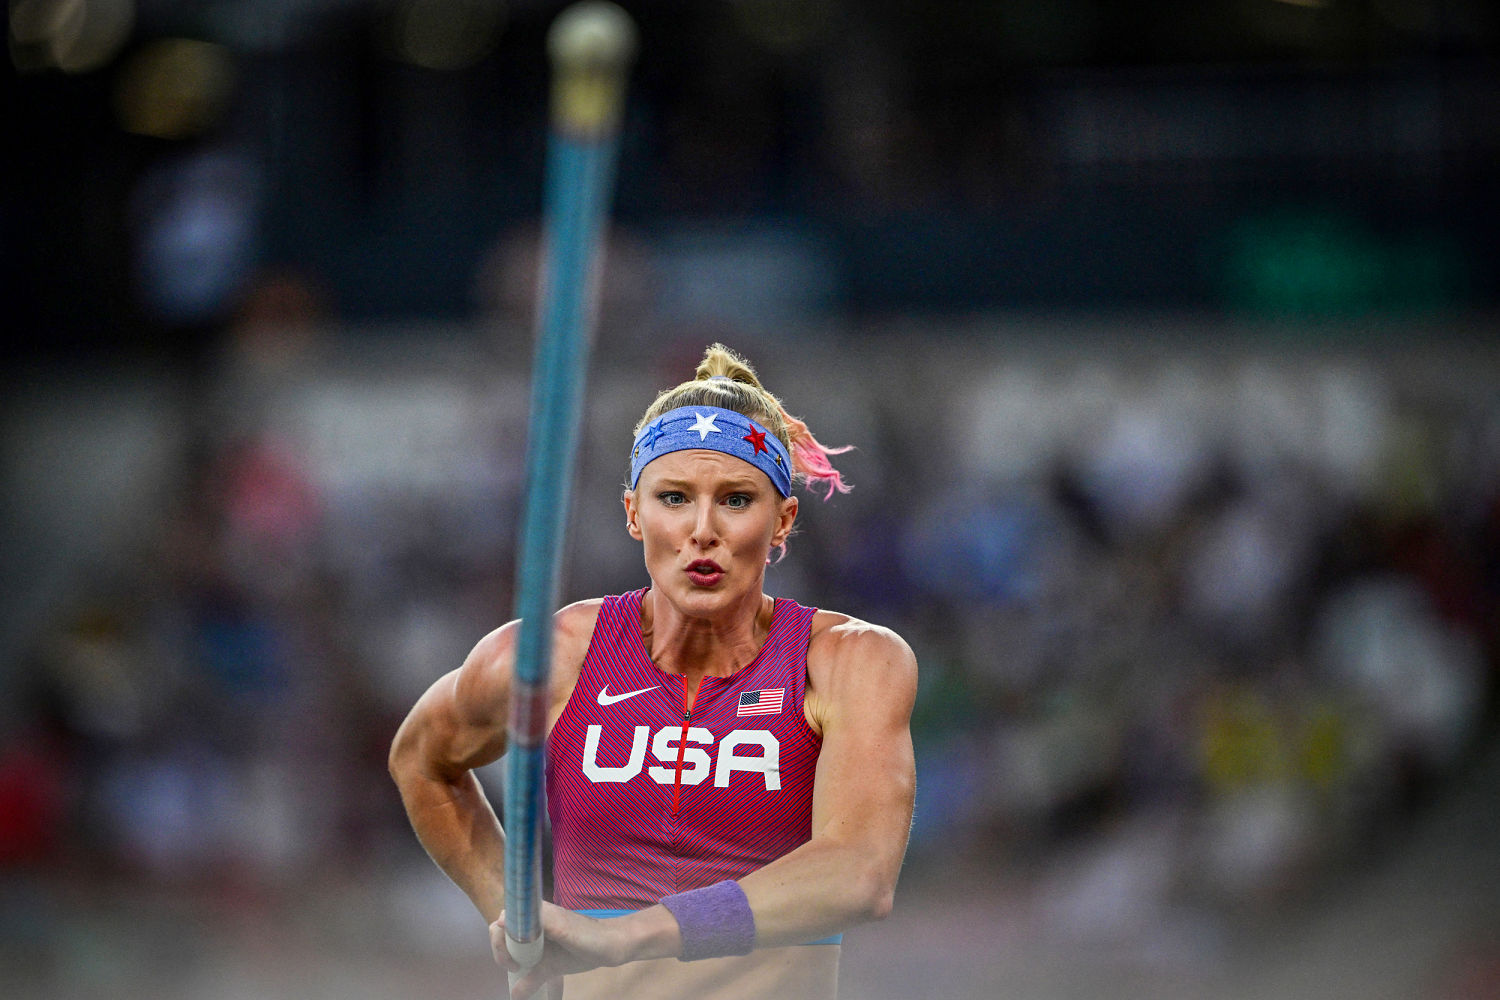 Olympian Sandi Morris reveals the worst day of her life and how it fueled her 